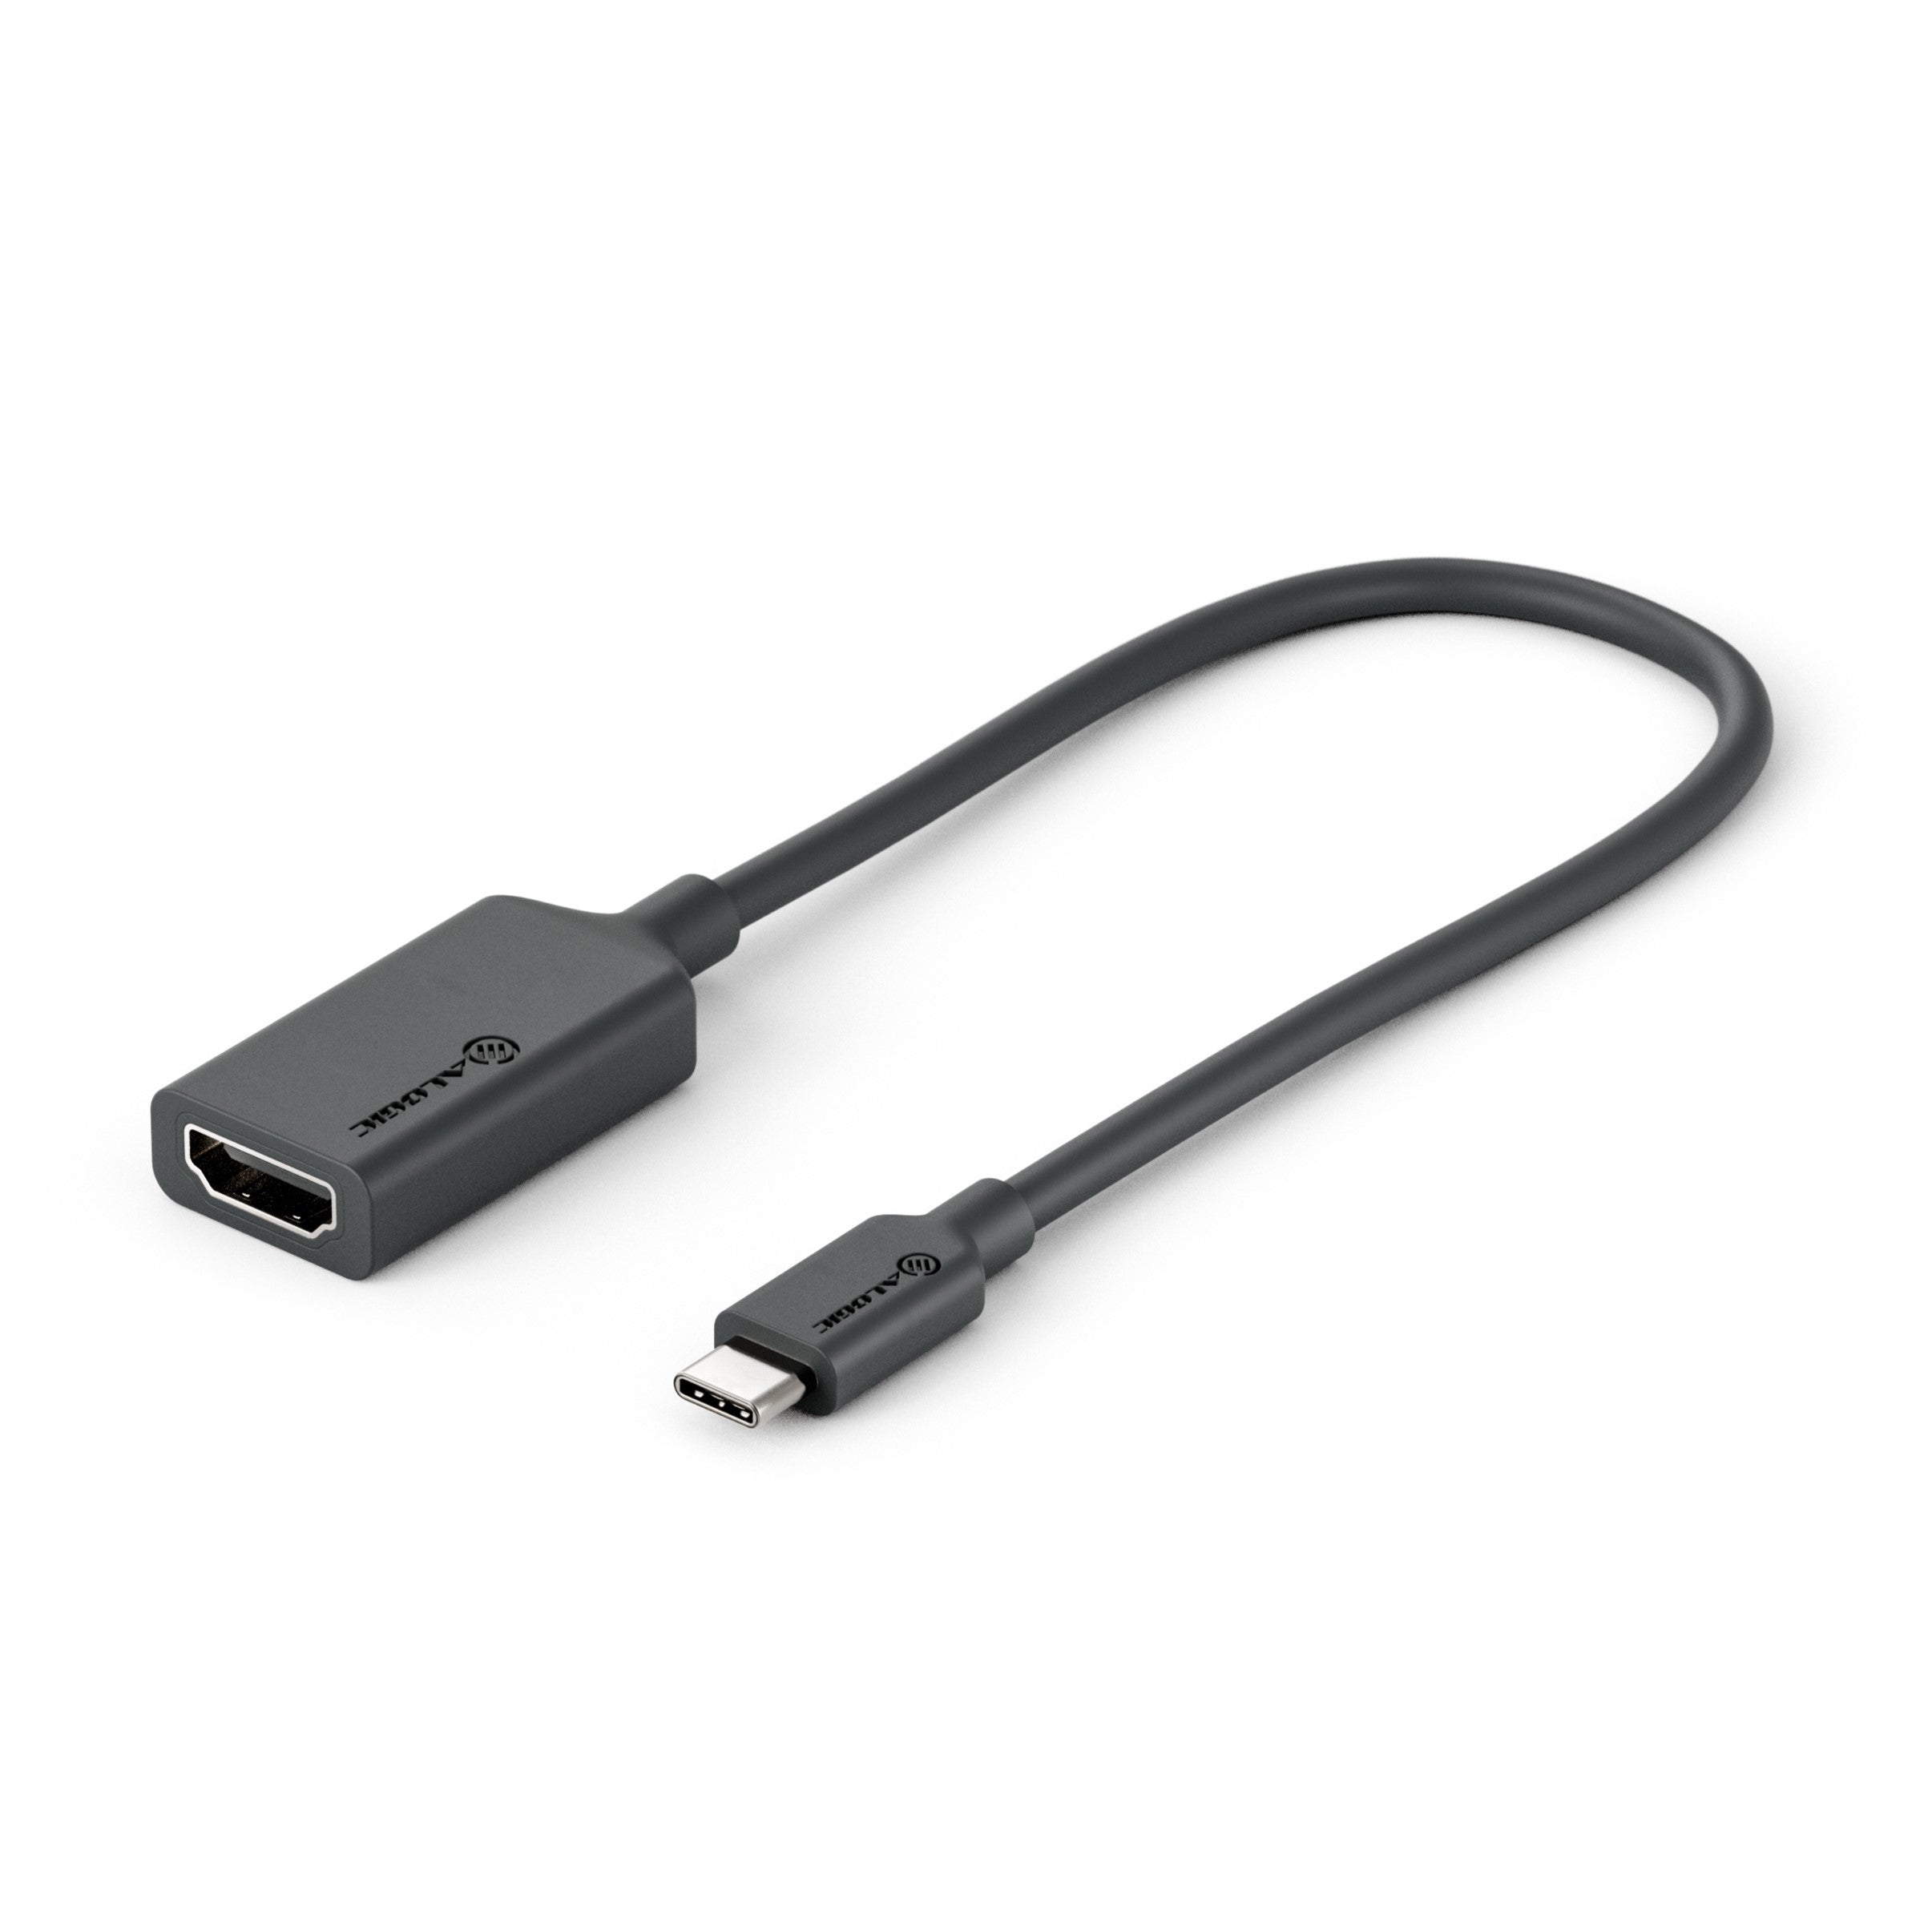 Elements Series USB-C to HDMI Adapter with 4K Support - Male to Female - 20cm